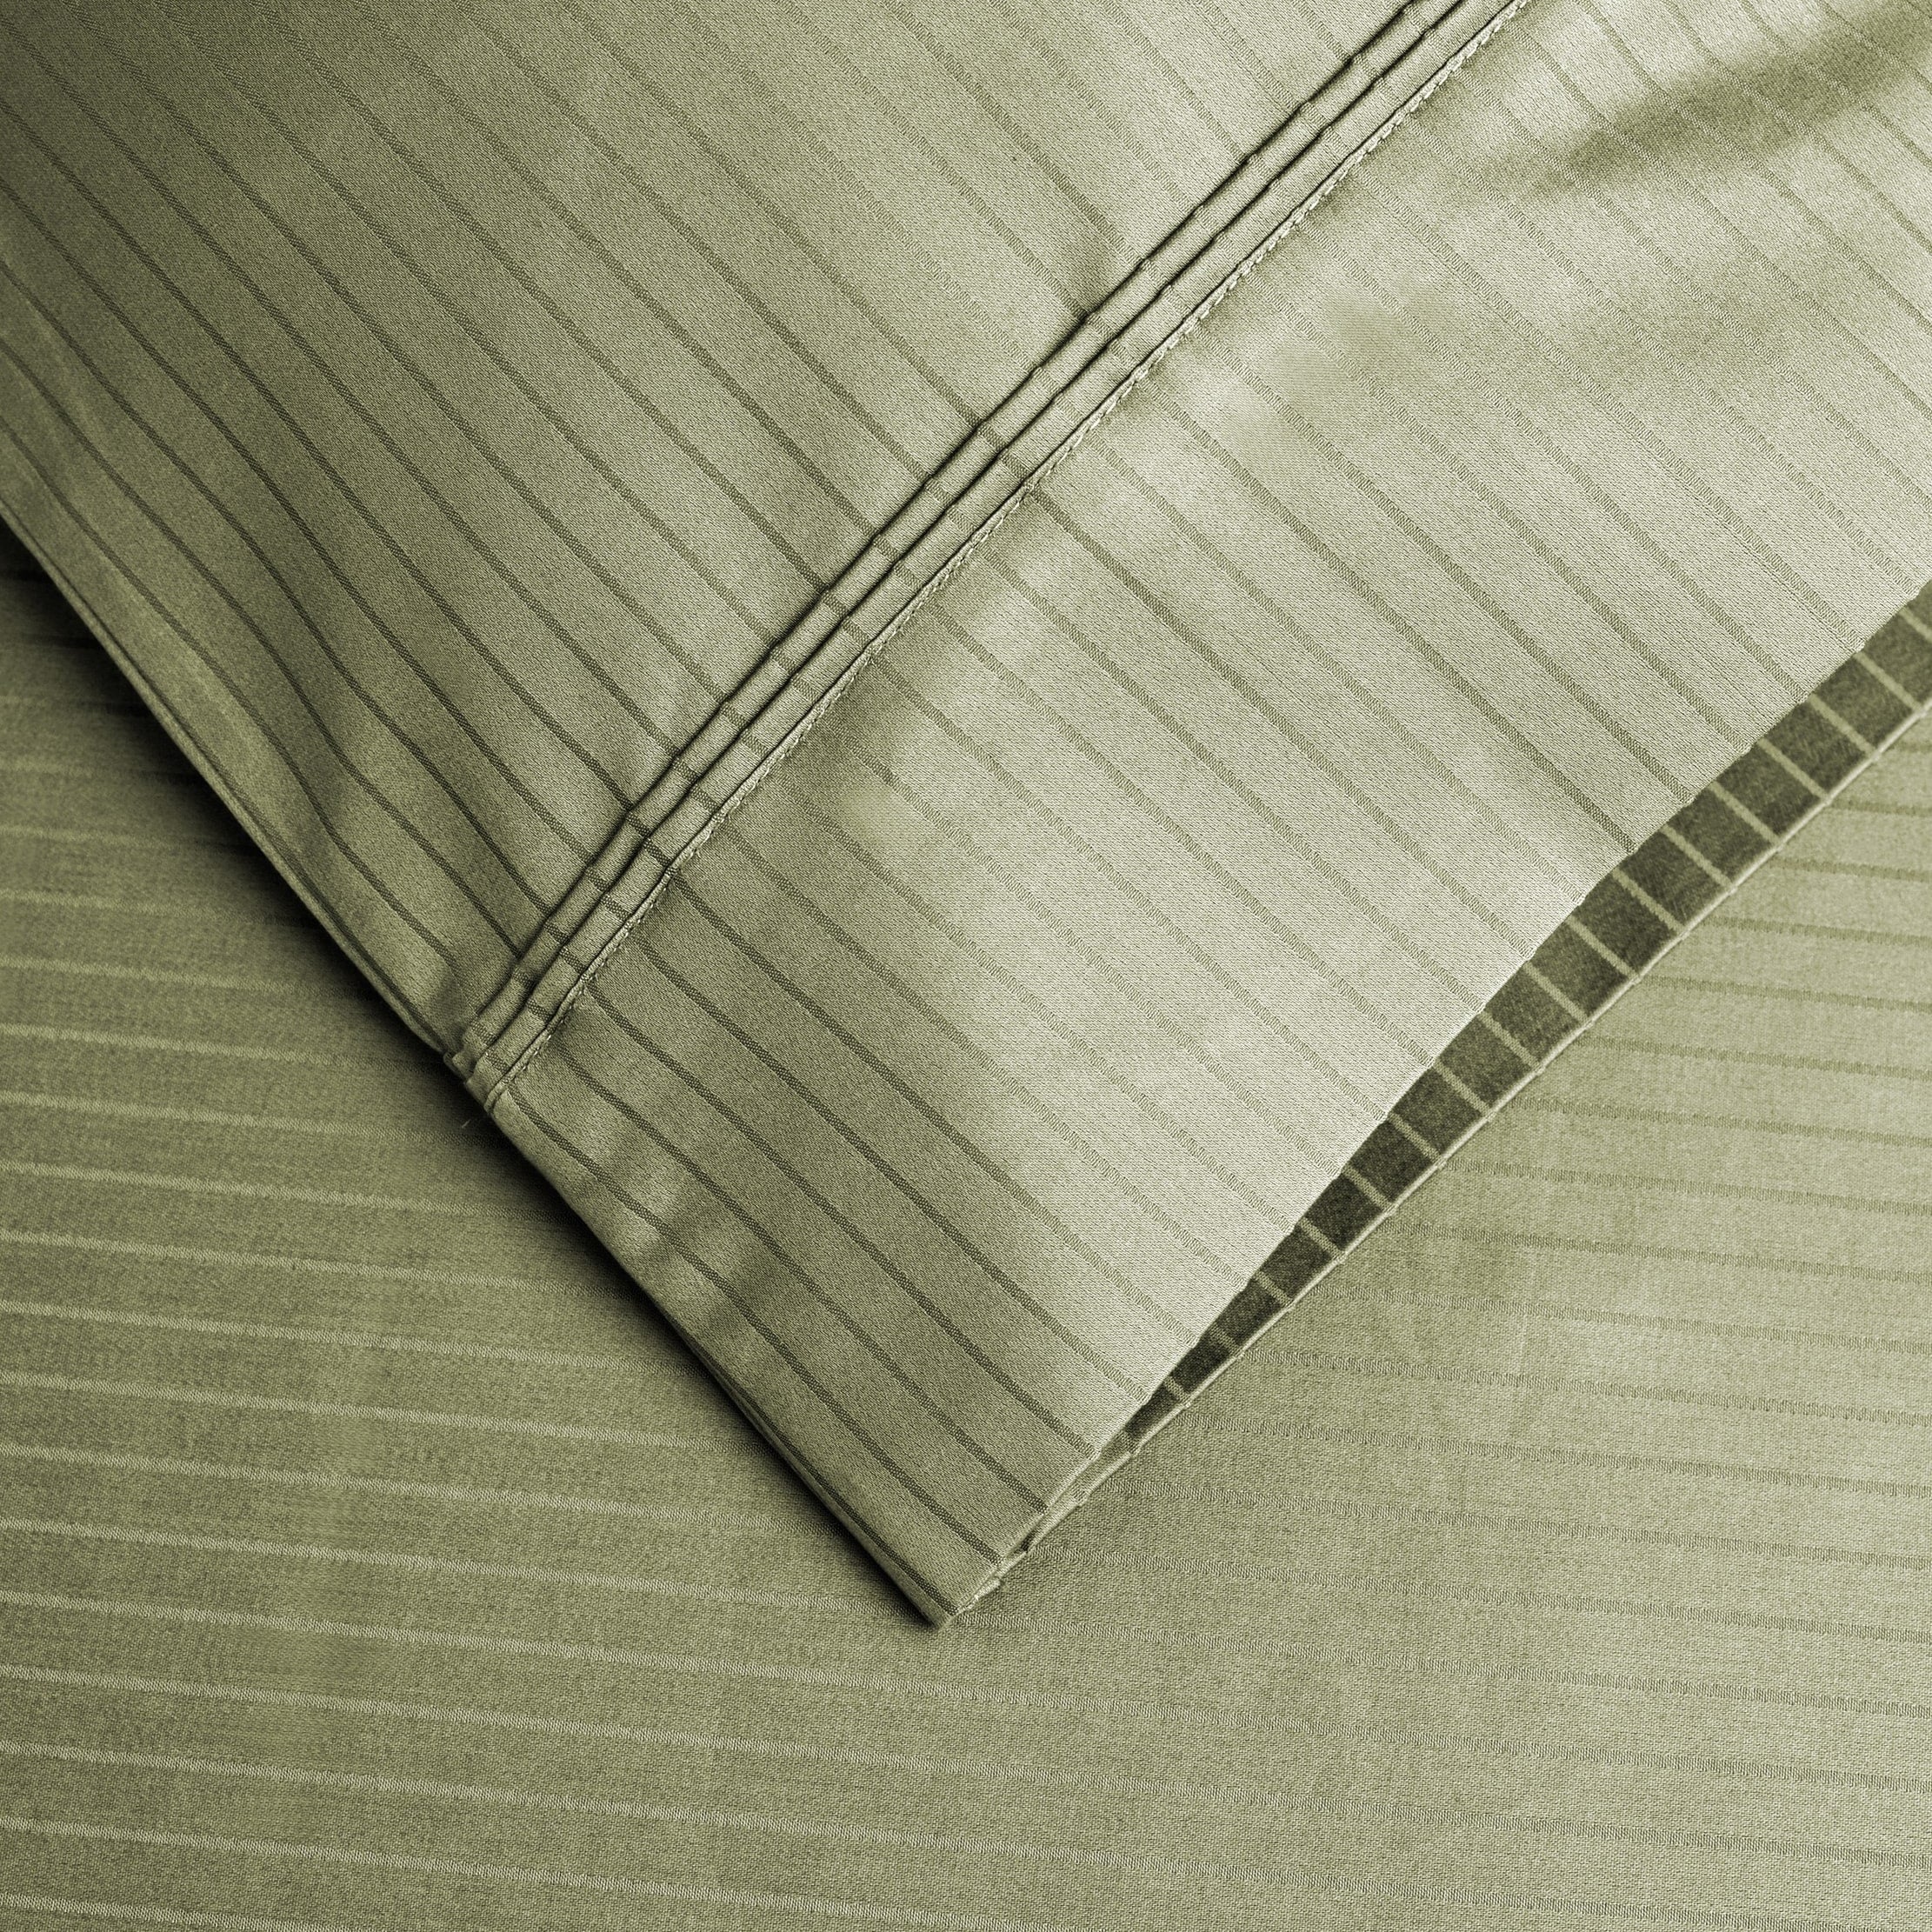 Details about  / EXTRA DEEP PKT 1 PC FITTED SHEET 1000 TC EGYPTIAN COTTON FULL XL SIZE ALL STRIPE